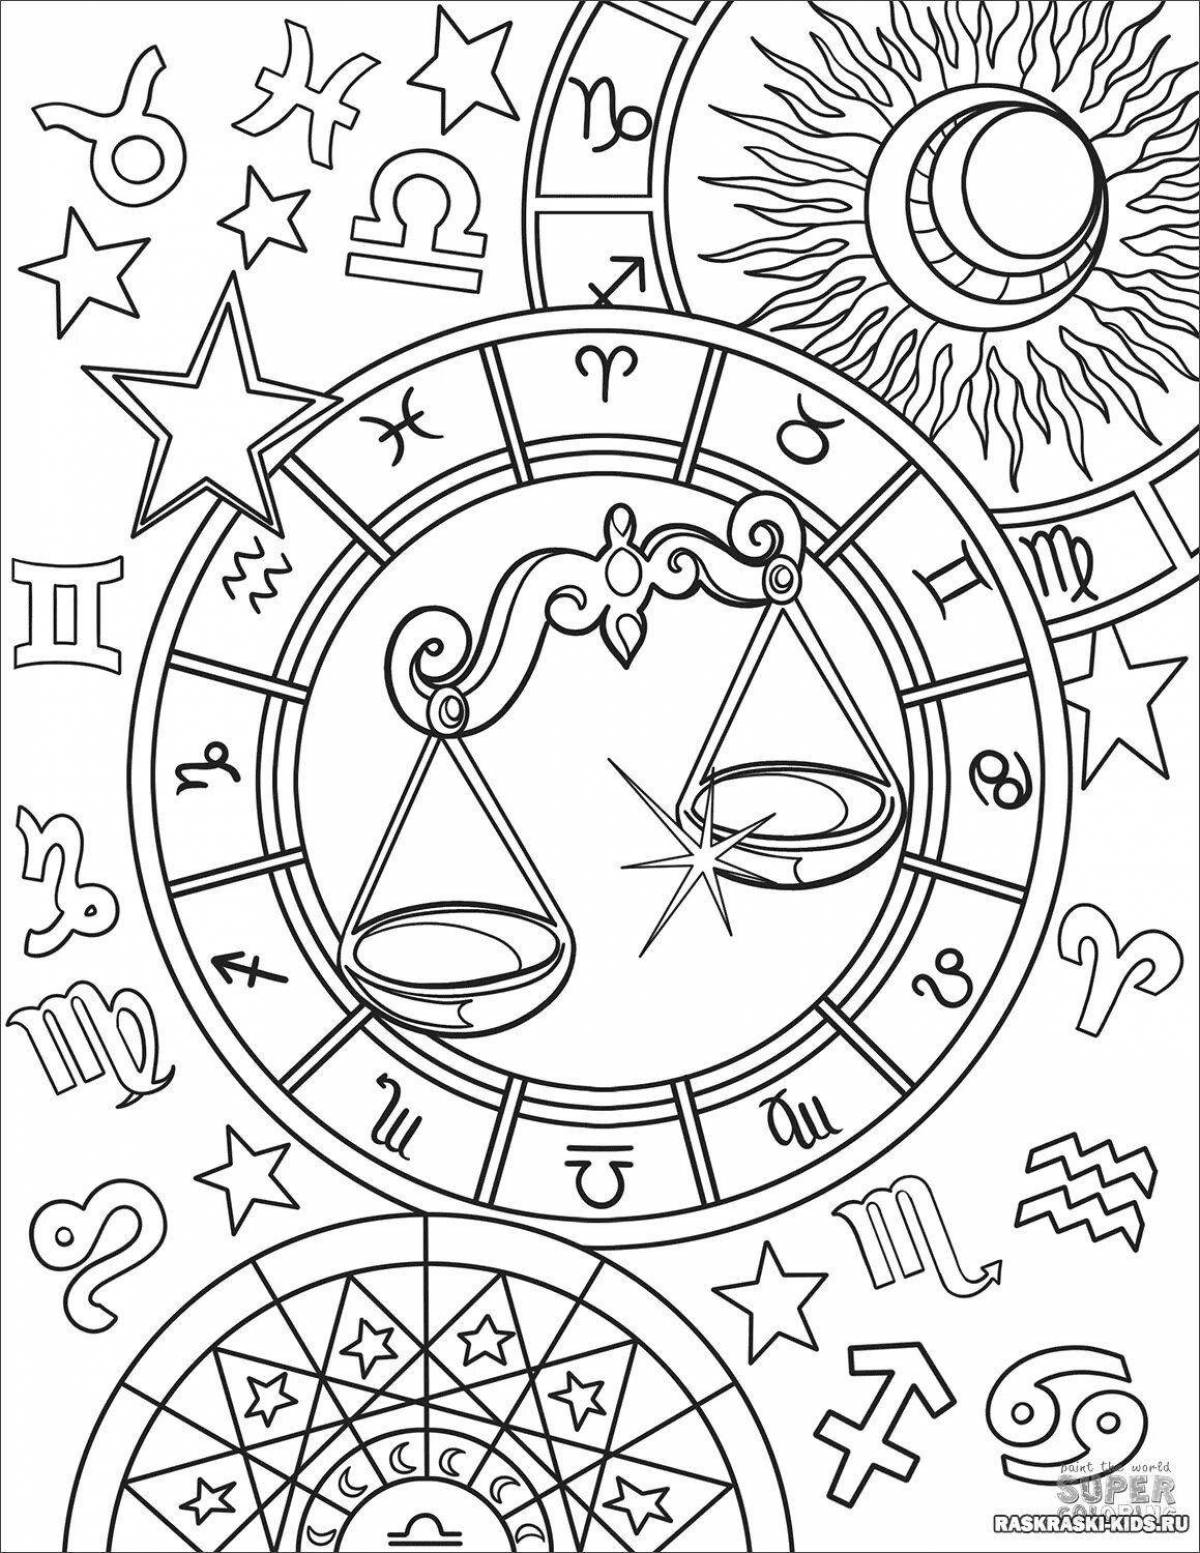 Colorful zodiac signs coloring pages for kids